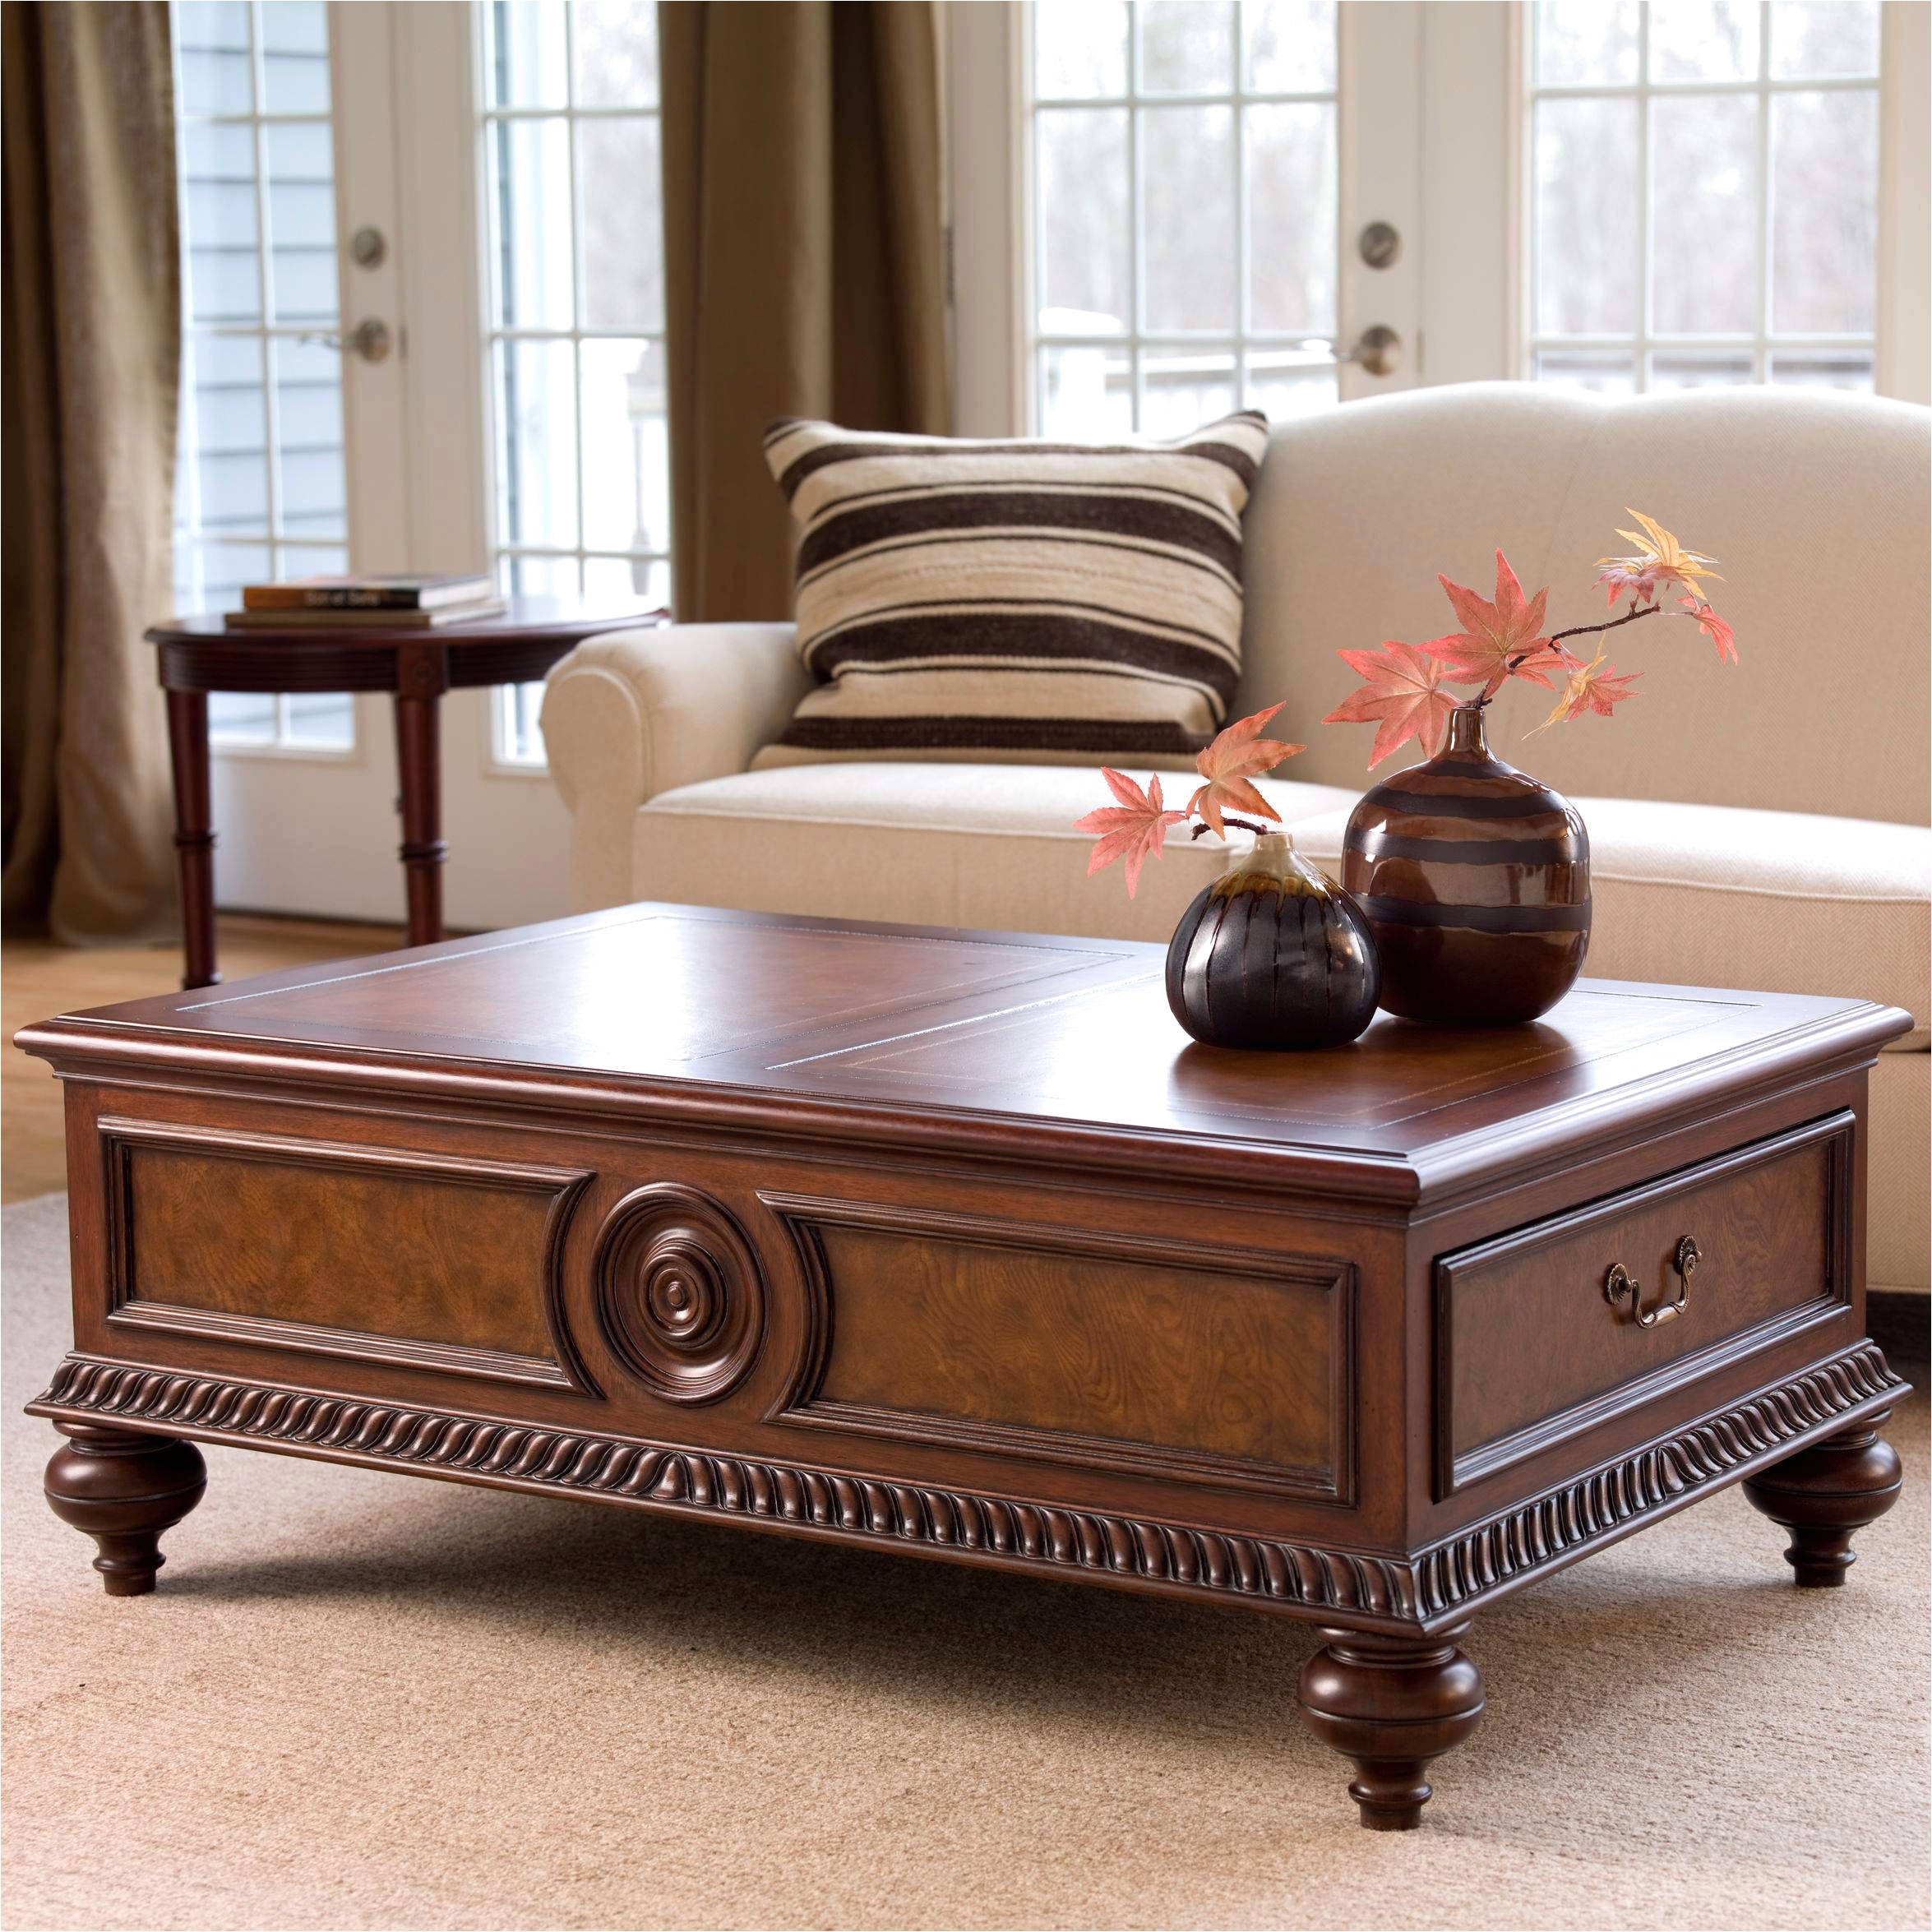 American Furniture Warehouse Coffee Tables Awesome 48 Fresh S Ethan Allen Coffee Table Design